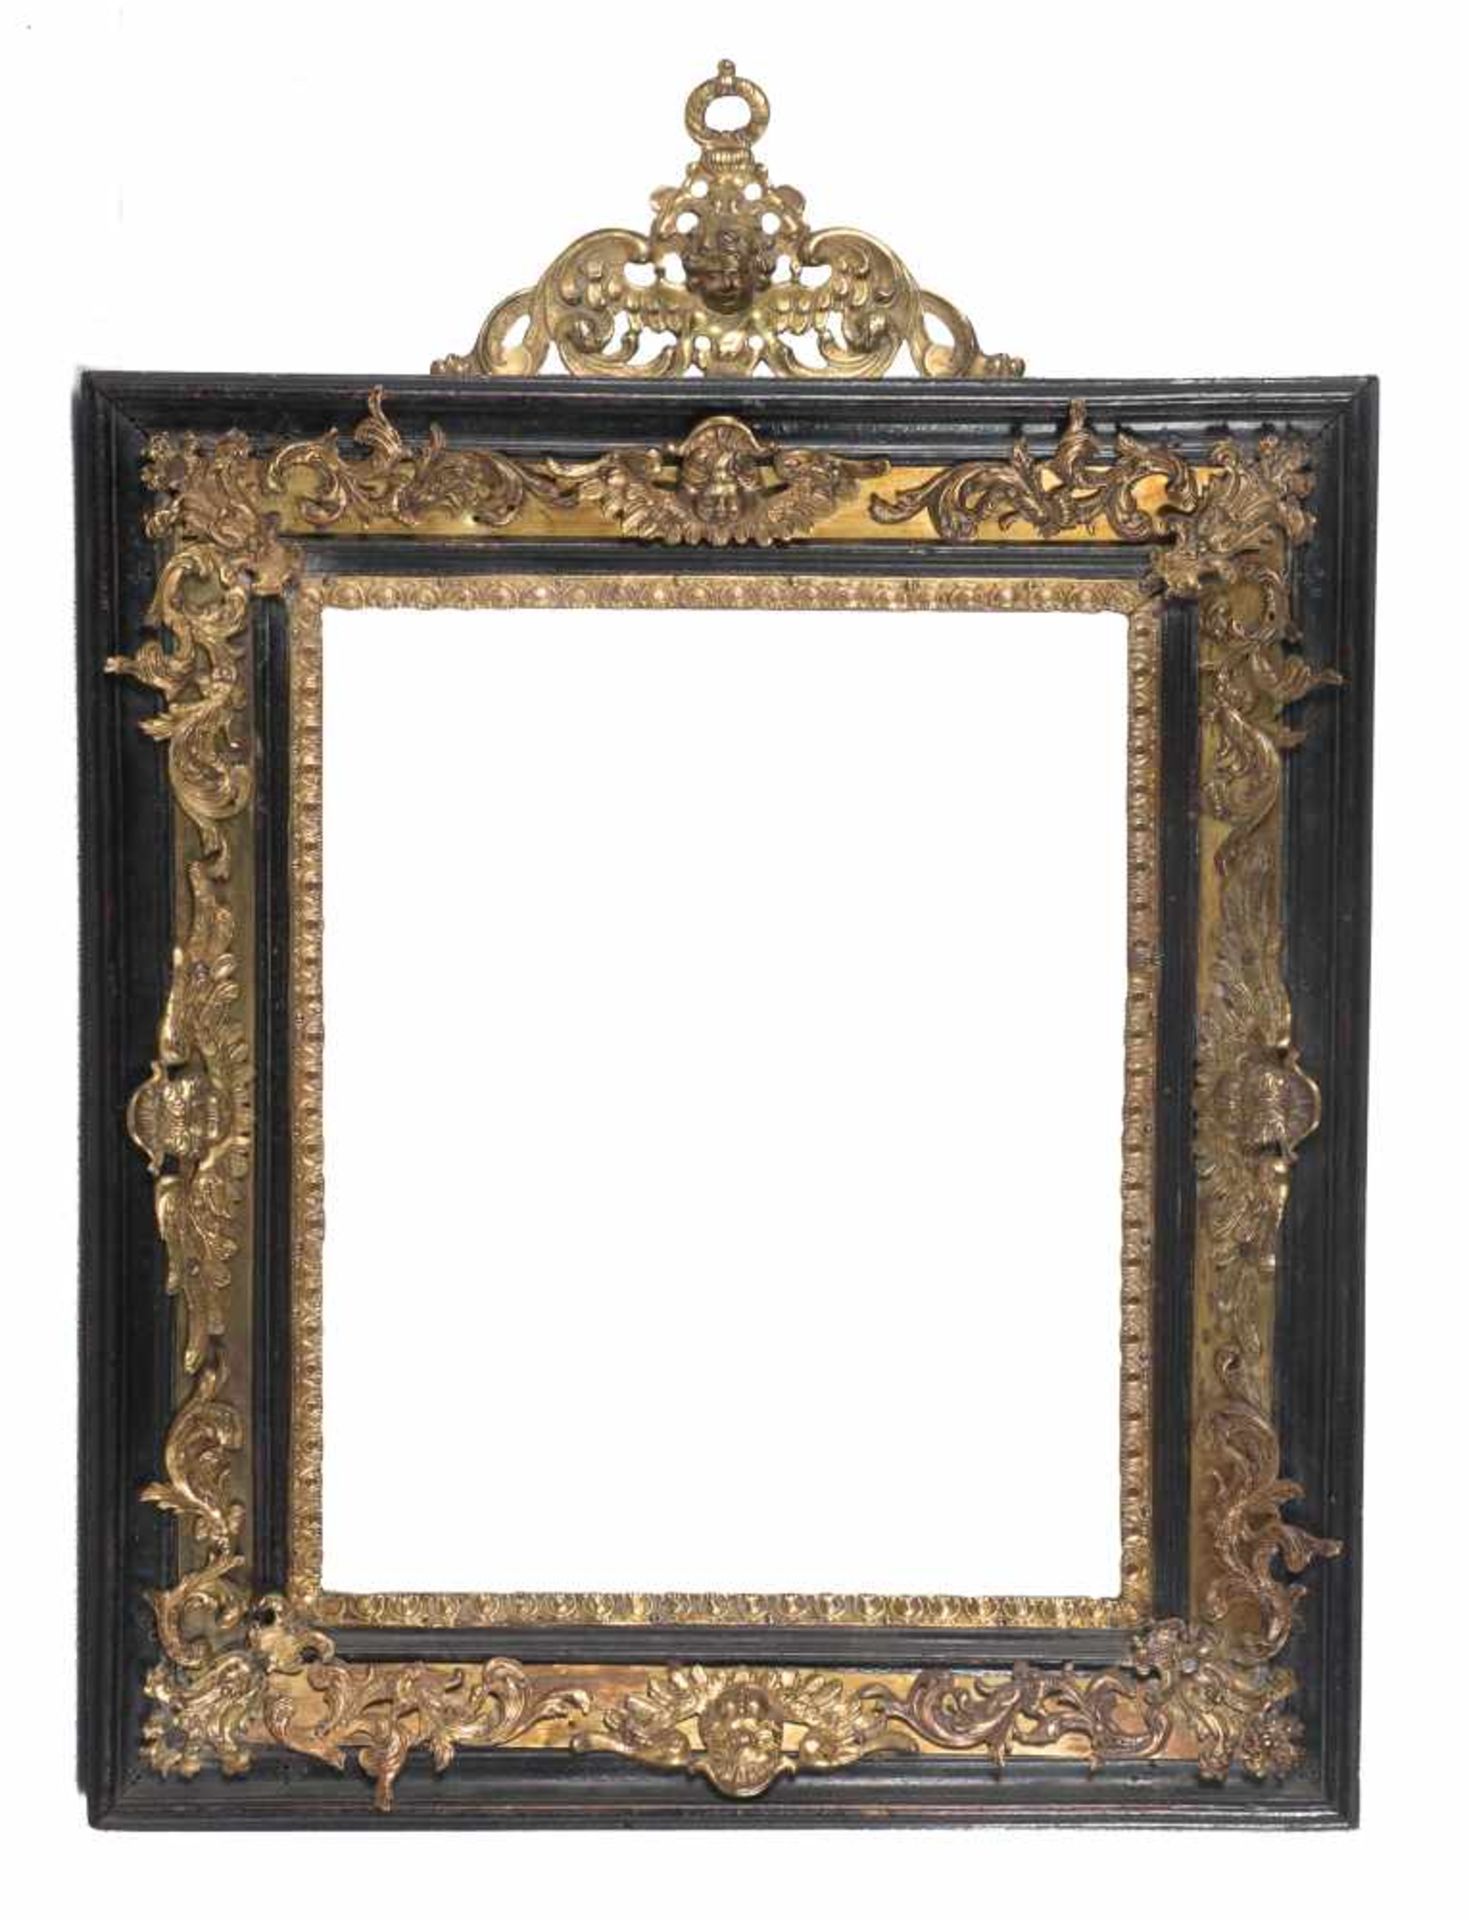 Carved ebony frame with gilt bronze applications. Italy. 17th century.